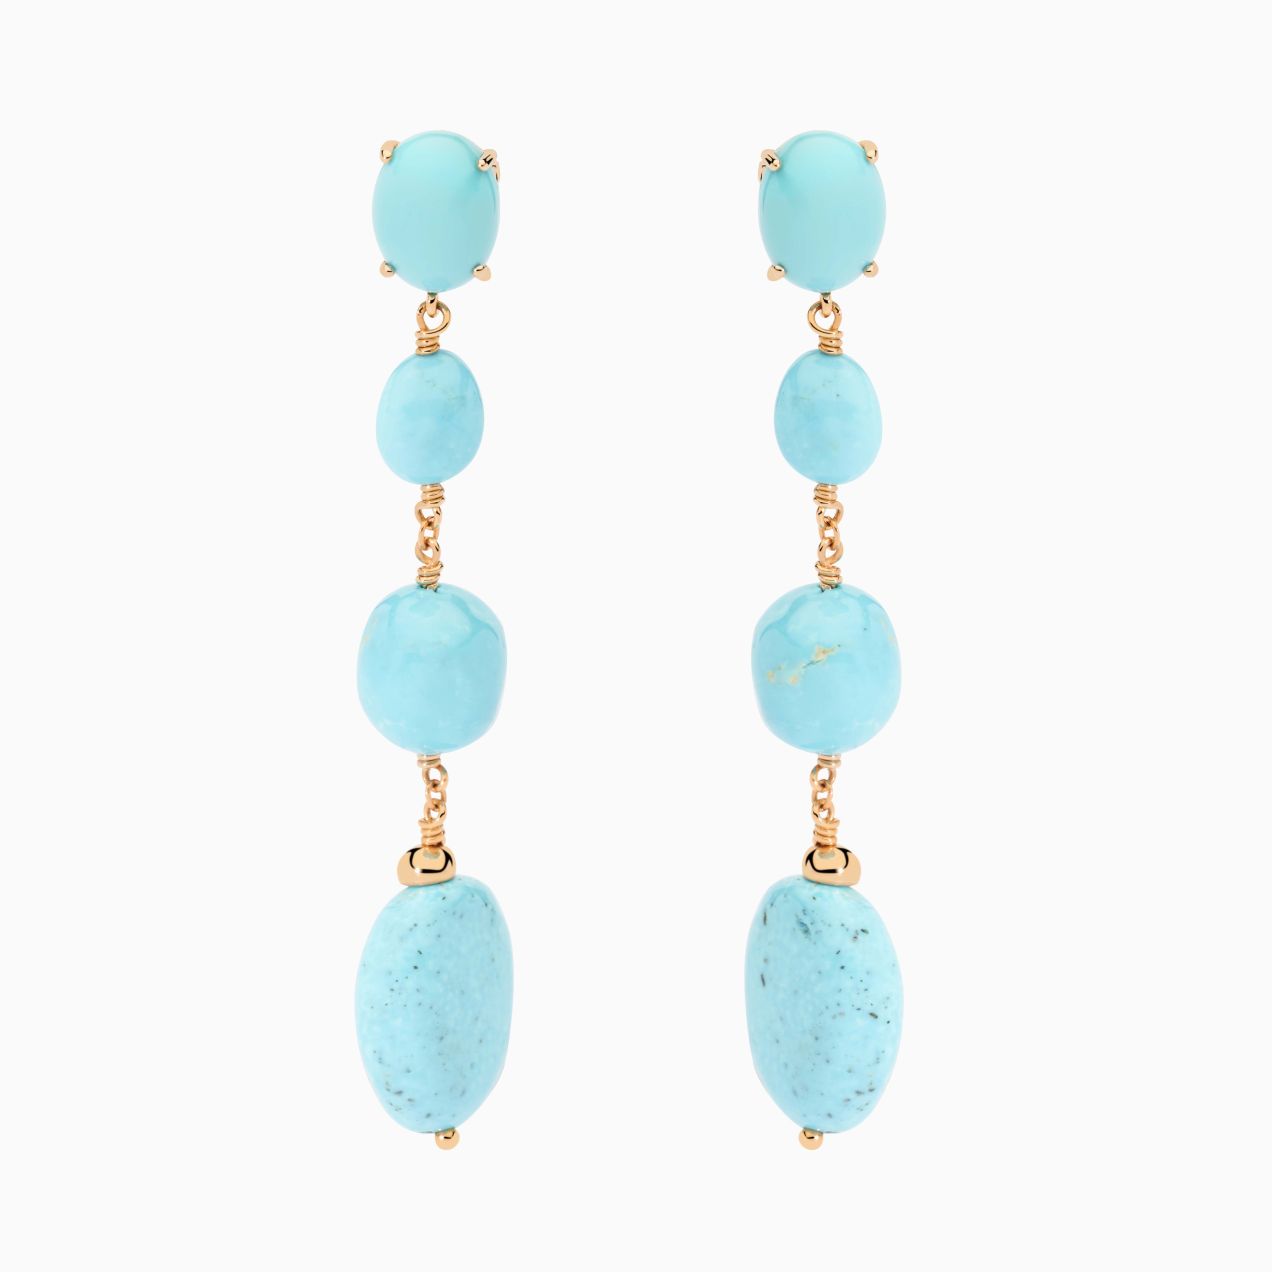 Rose gold earrings with turquoise gems